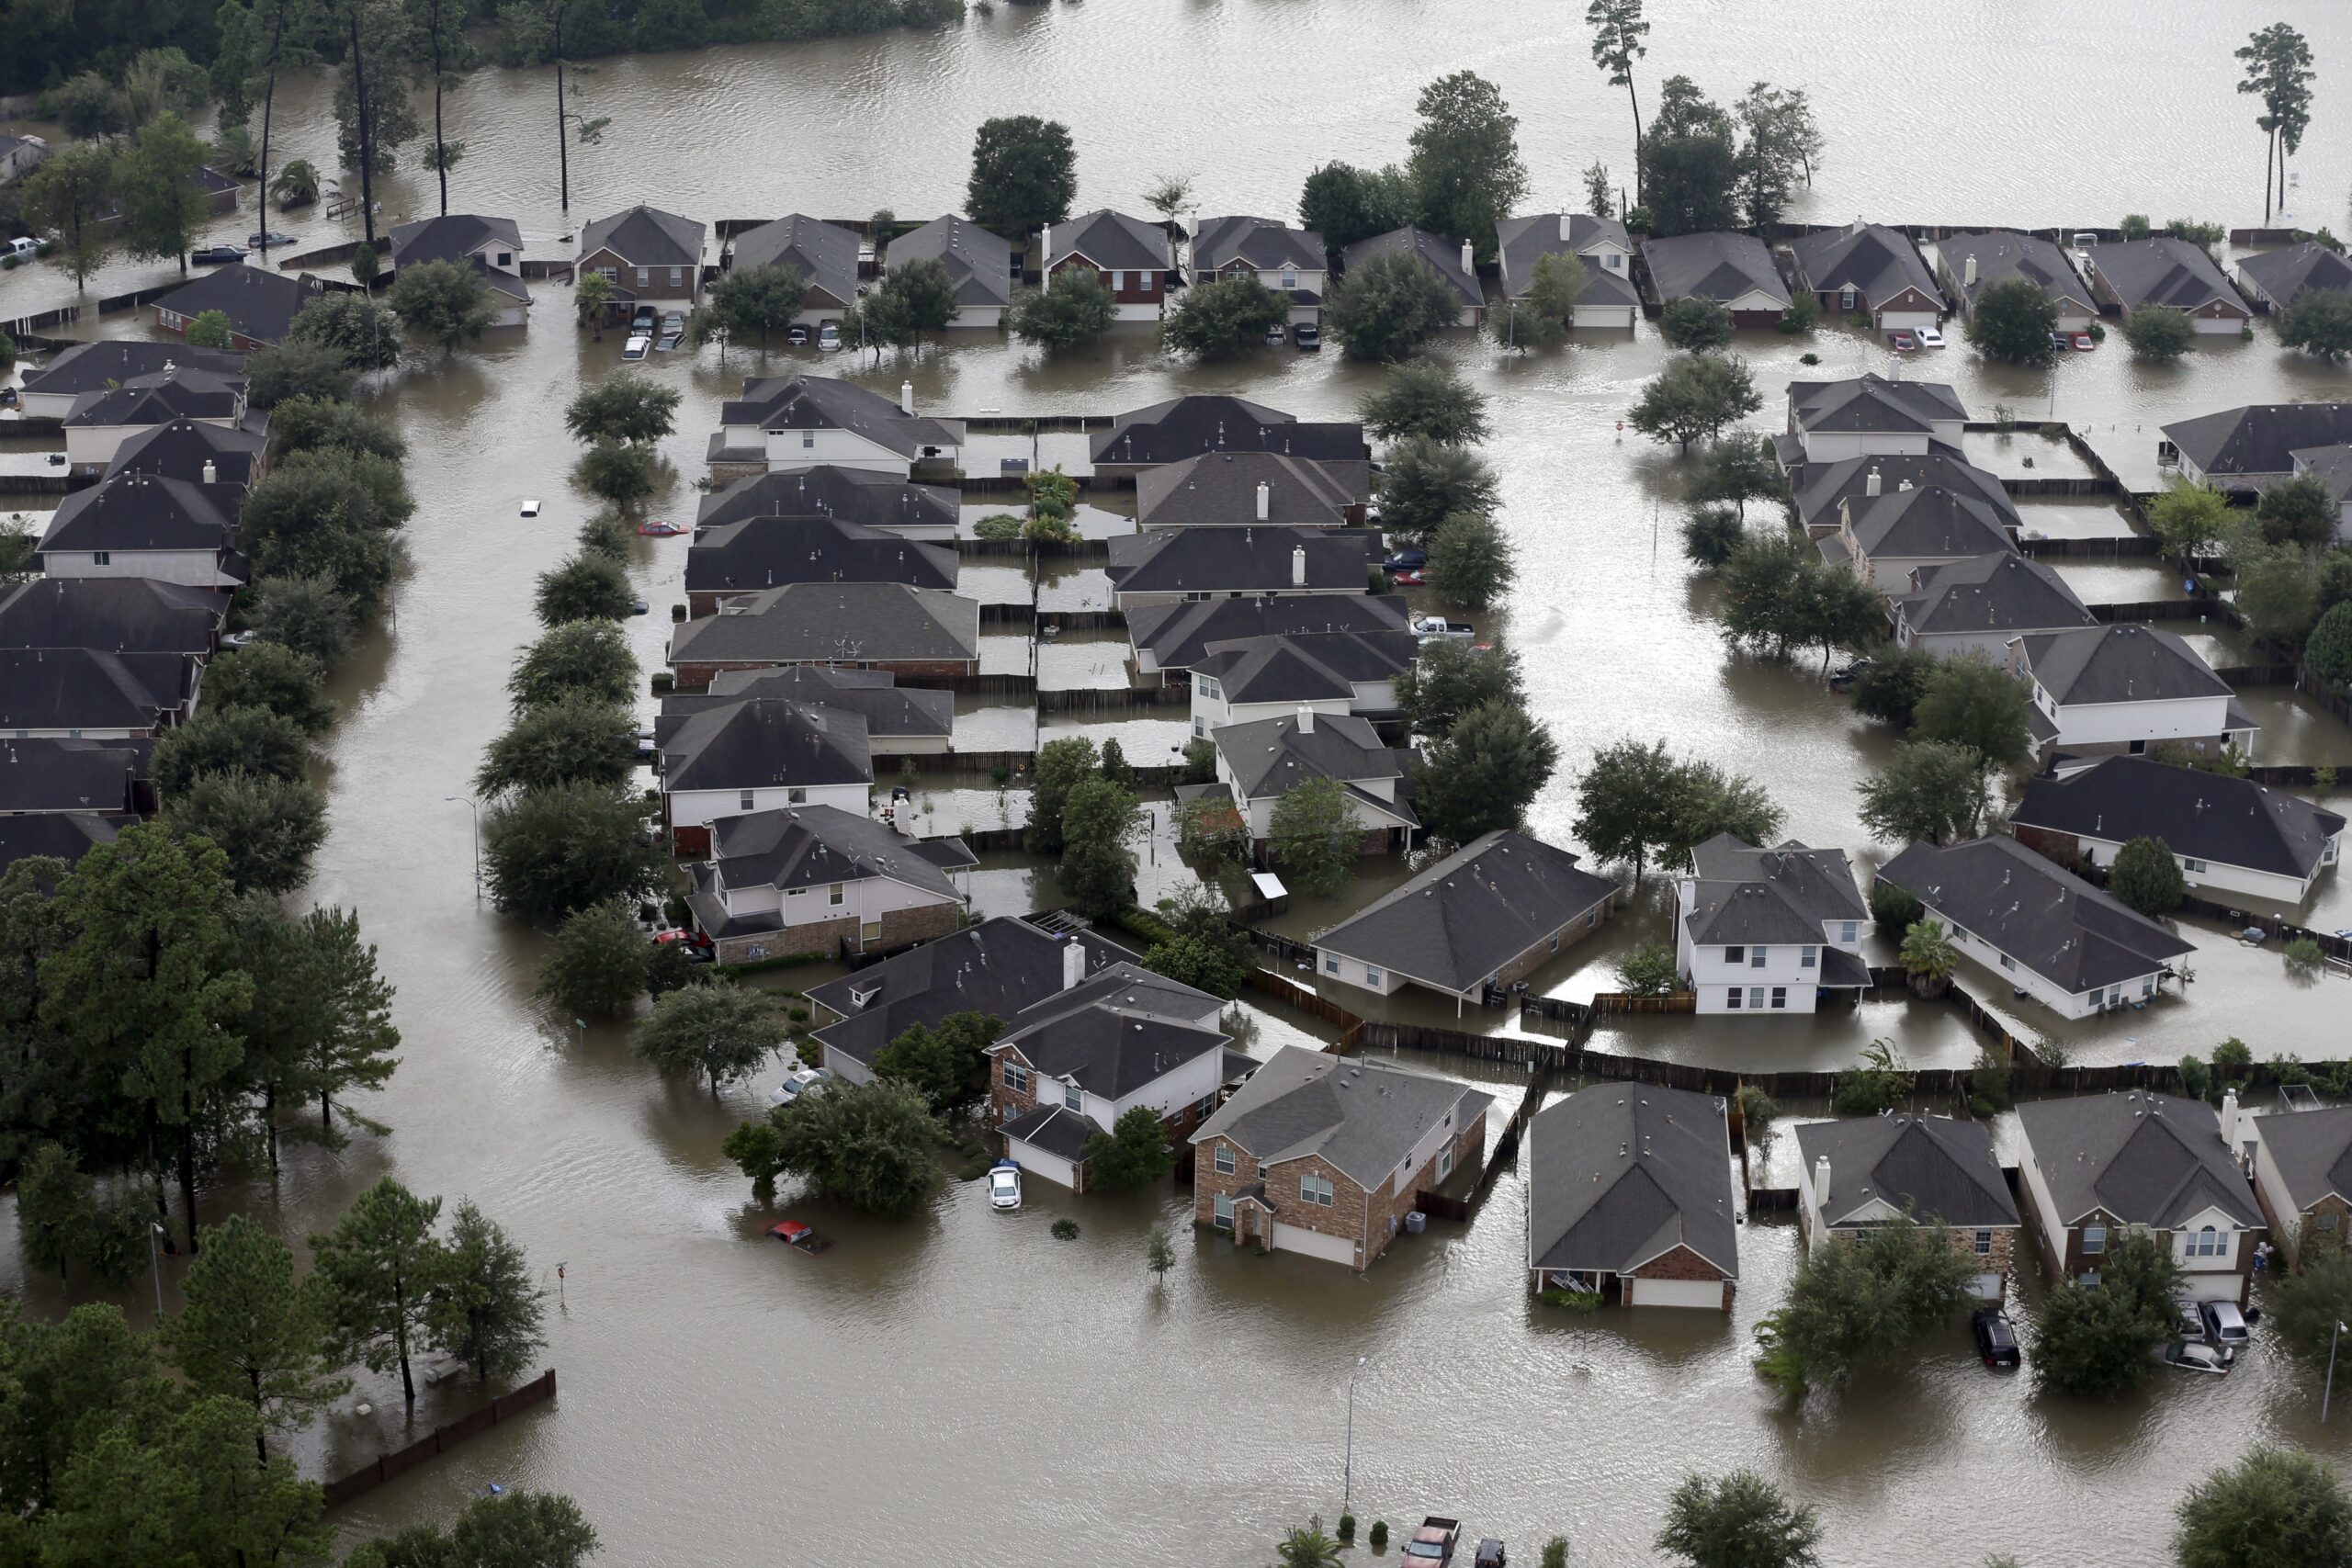 Homes are surrounded by floodwaters from Tropical Storm Harvey in Spring, Texas